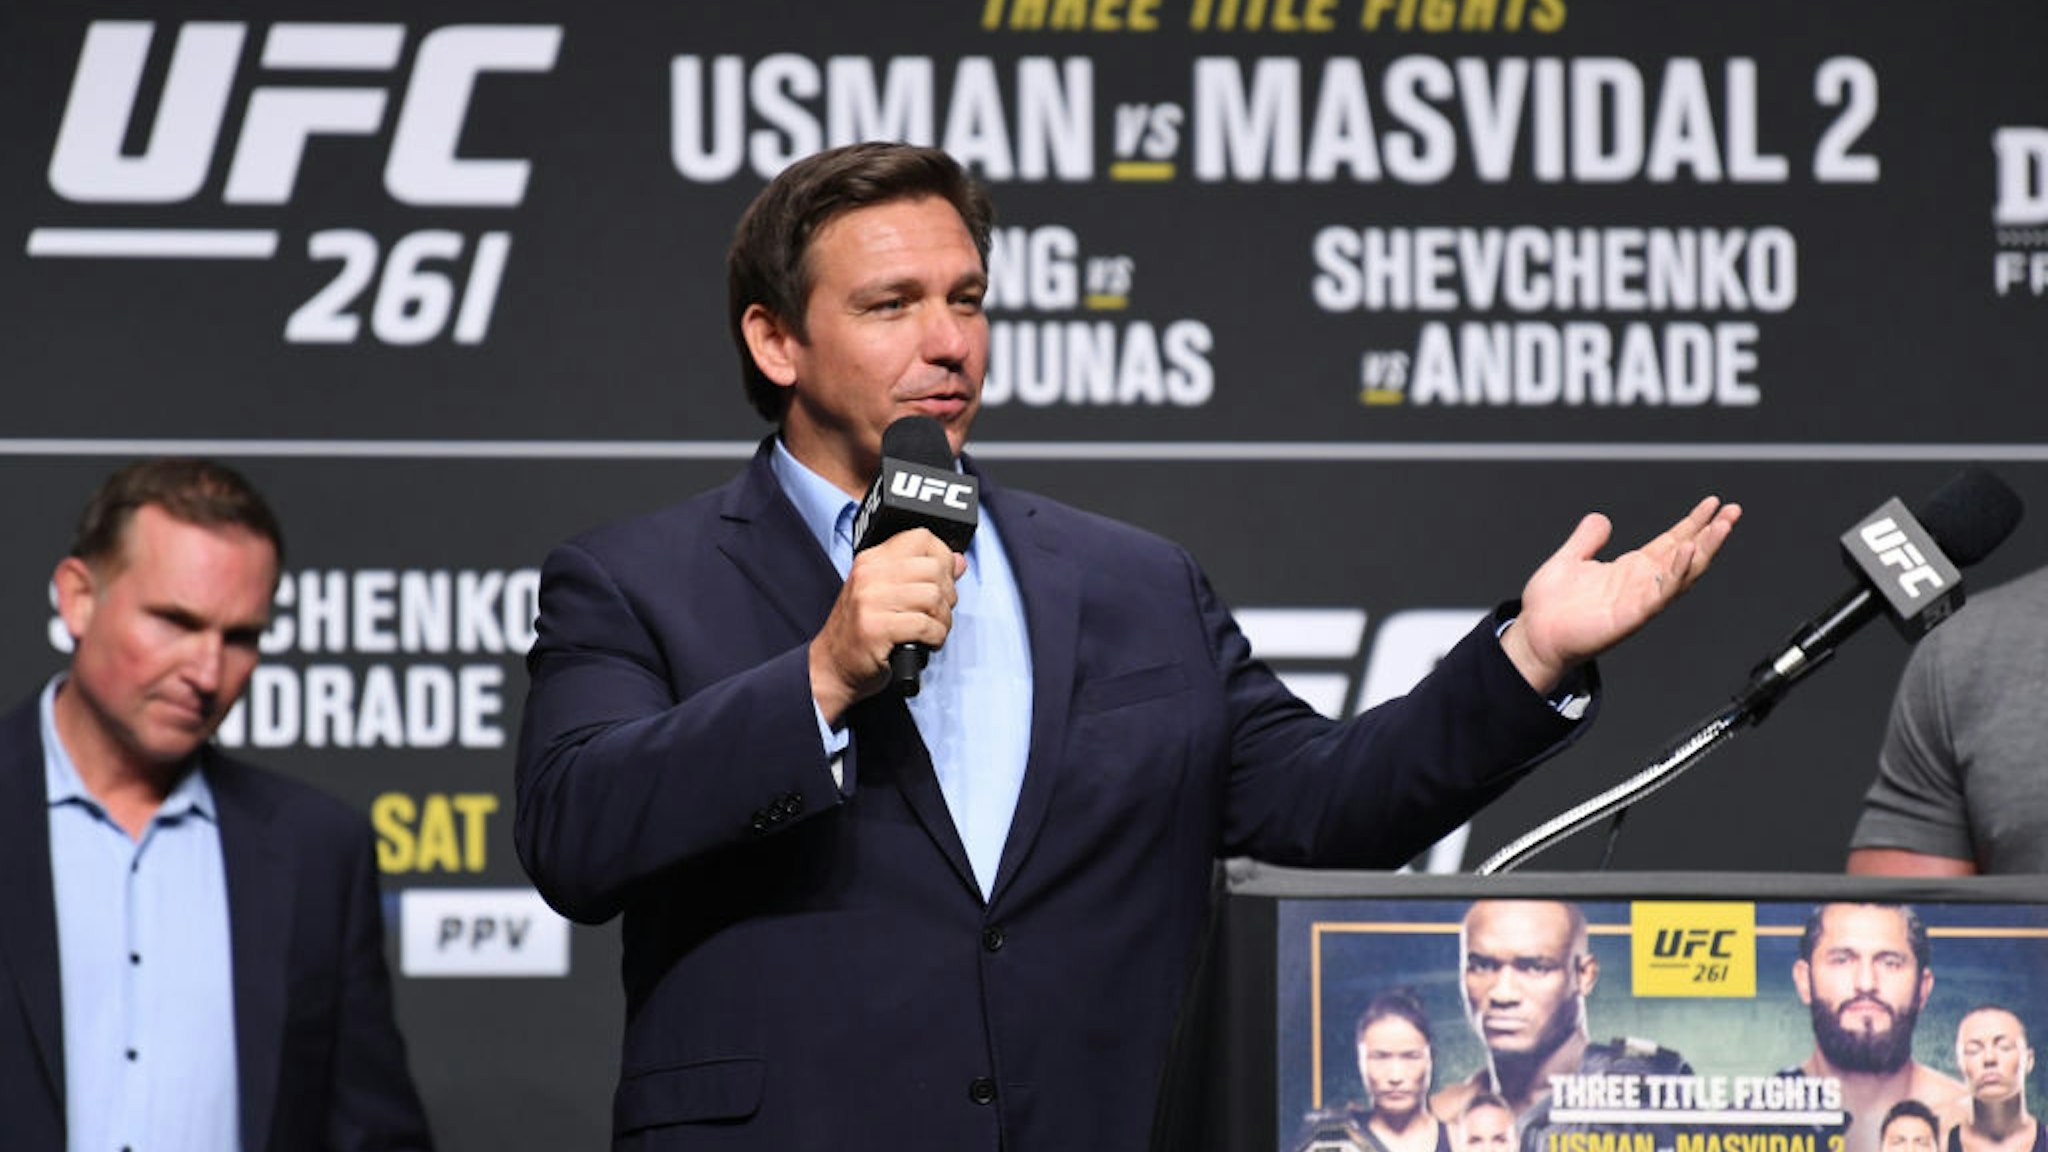 JACKSONVILLE, FLORIDA - APRIL 22: Florida Gov. Ron DeSantis interacts with media during the UFC 261 press conference at VyStar Veterans Memorial Arena on April 22, 2021 in Jacksonville, Florida. (Photo by Josh Hedges/Zuffa LLC)